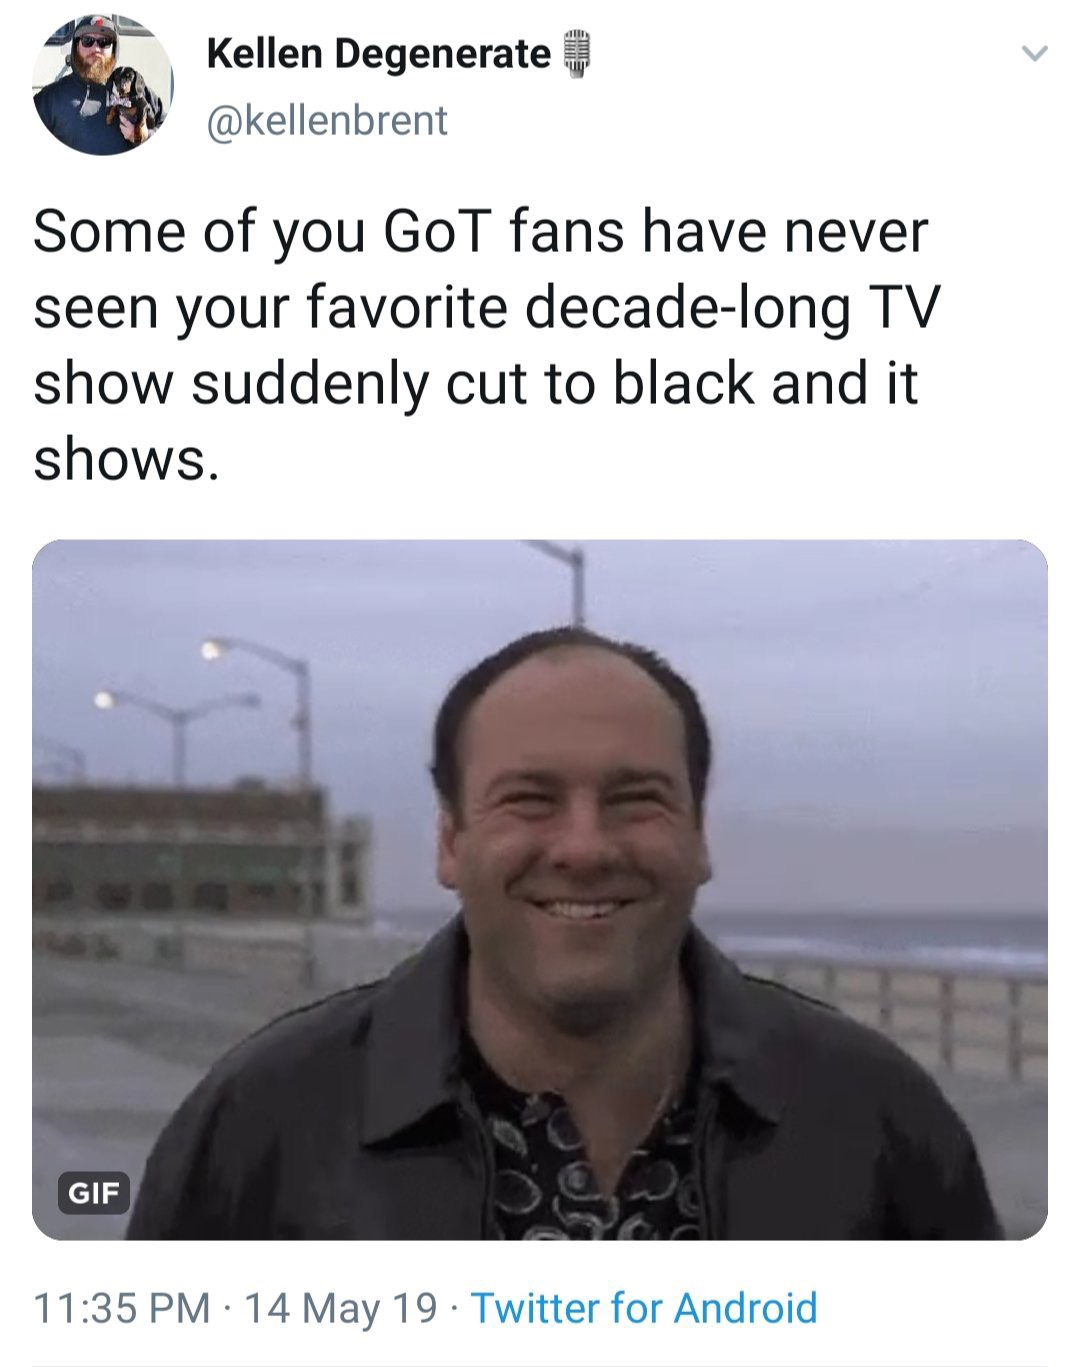 meme game of thrones dexter lost fans - Kellen Degenerate @ Some of you GoT fans have never seen your favorite decadelong Tv show suddenly cut to black and it shows. Gif 14 May 19 Twitter for Android